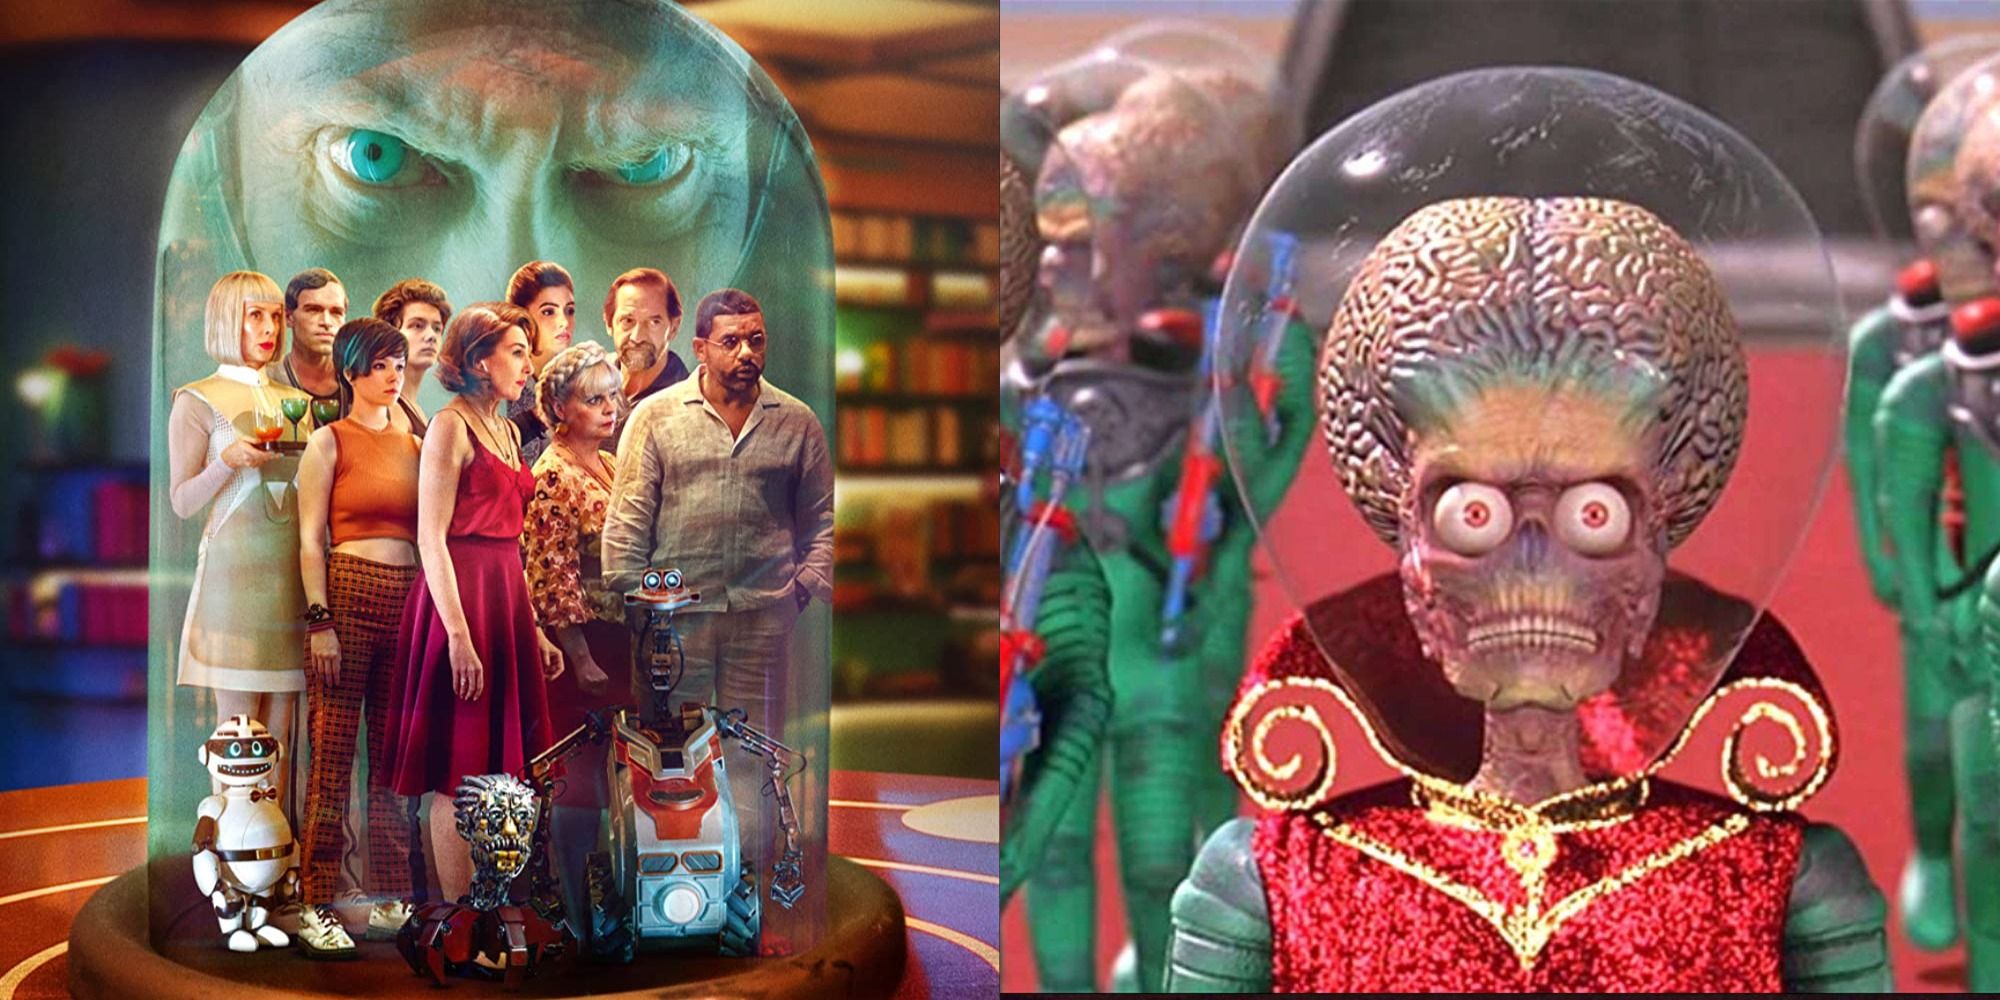 Split image showing scenes from Big Bug and Mars Attacks!